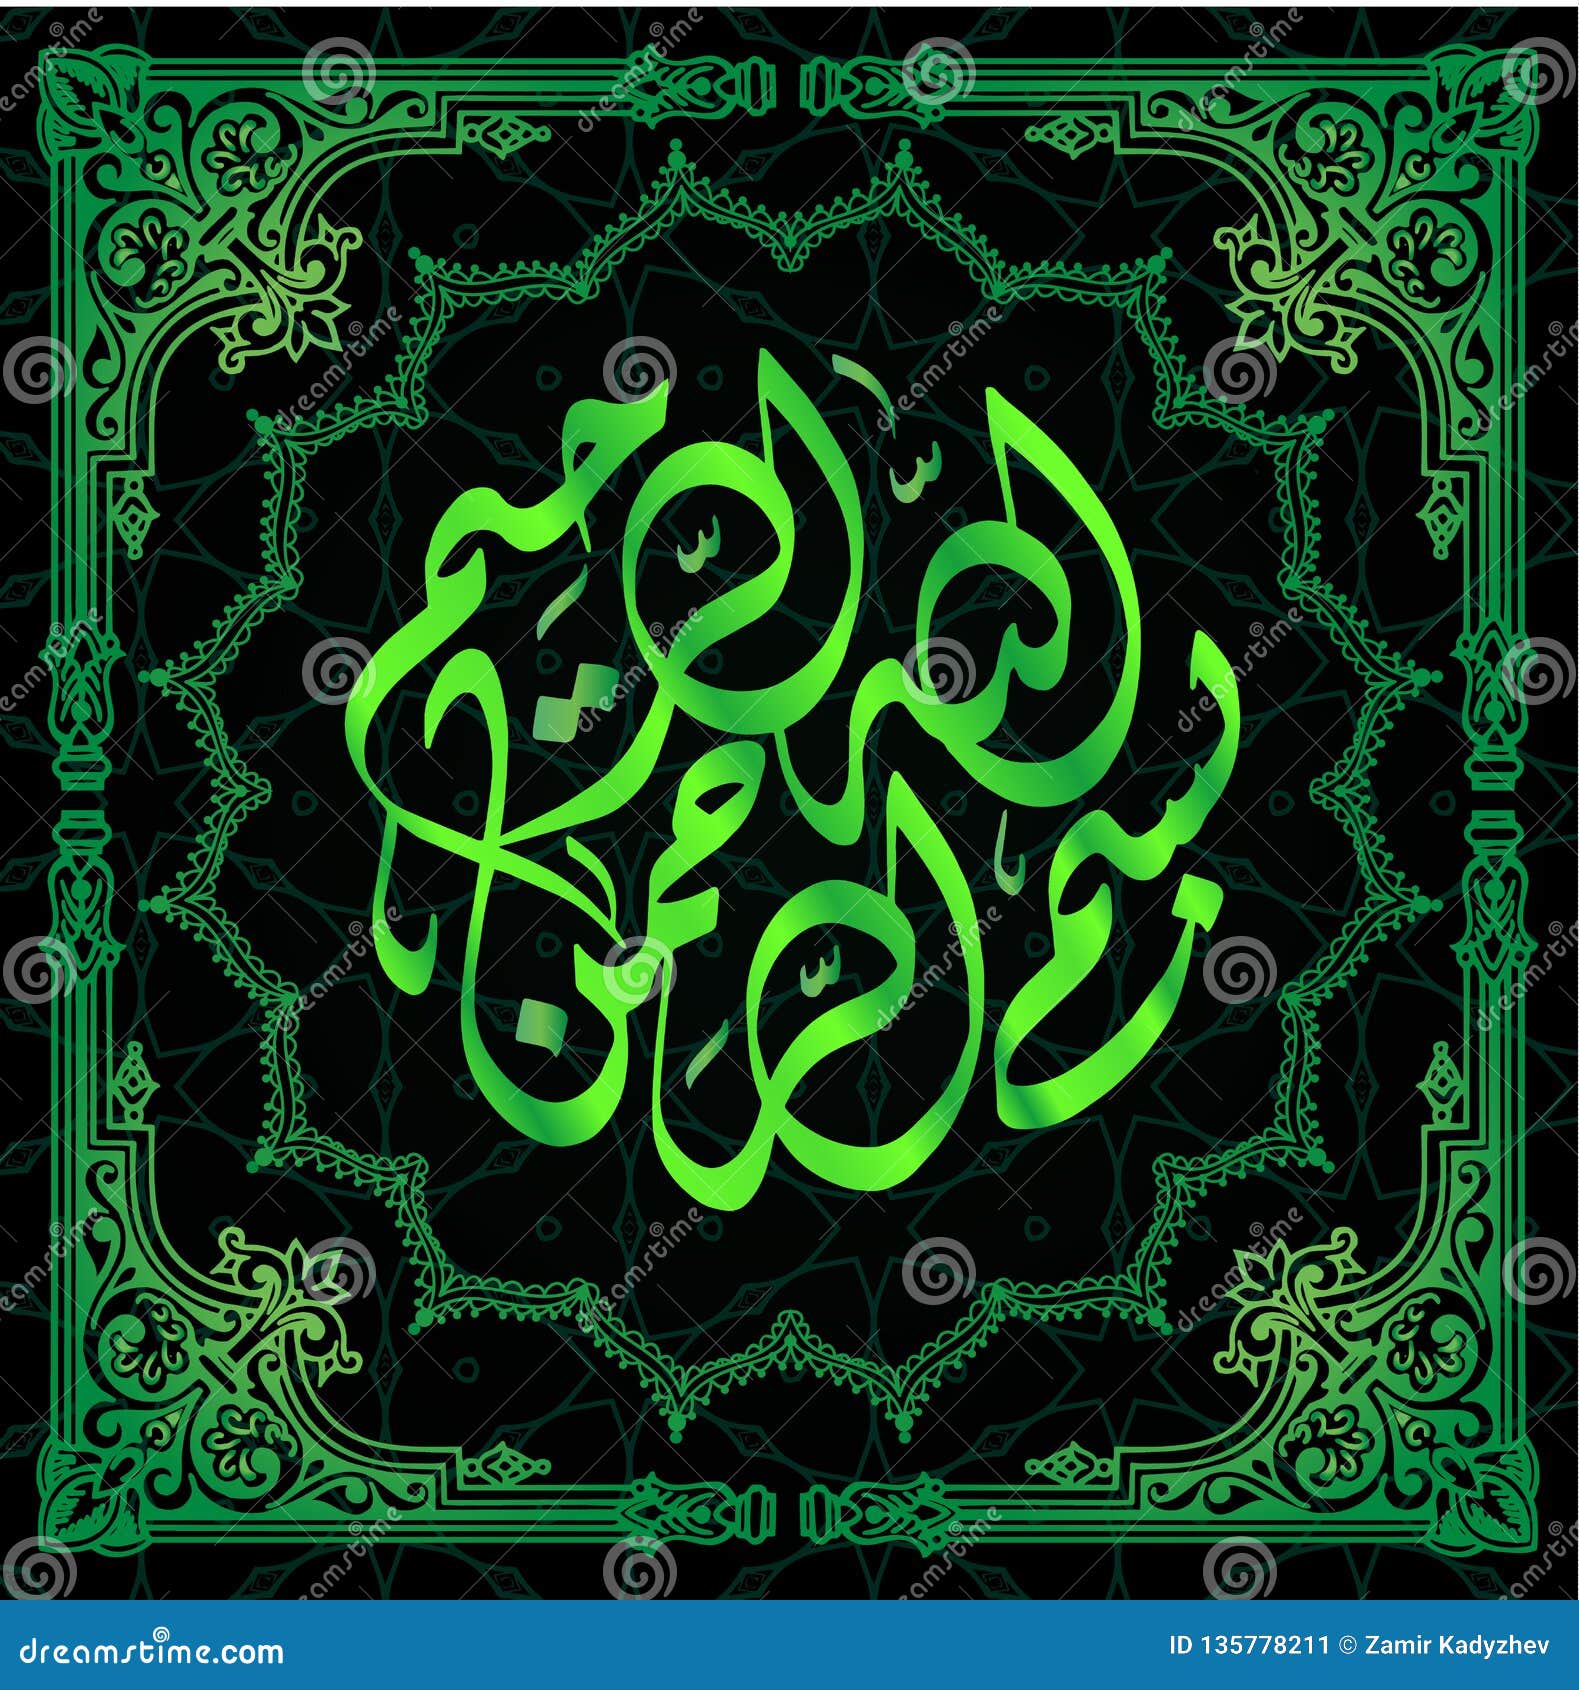 arabic calligraphy of the traditional islamic art of the basmala, for example, ramadan and other festivals. translation